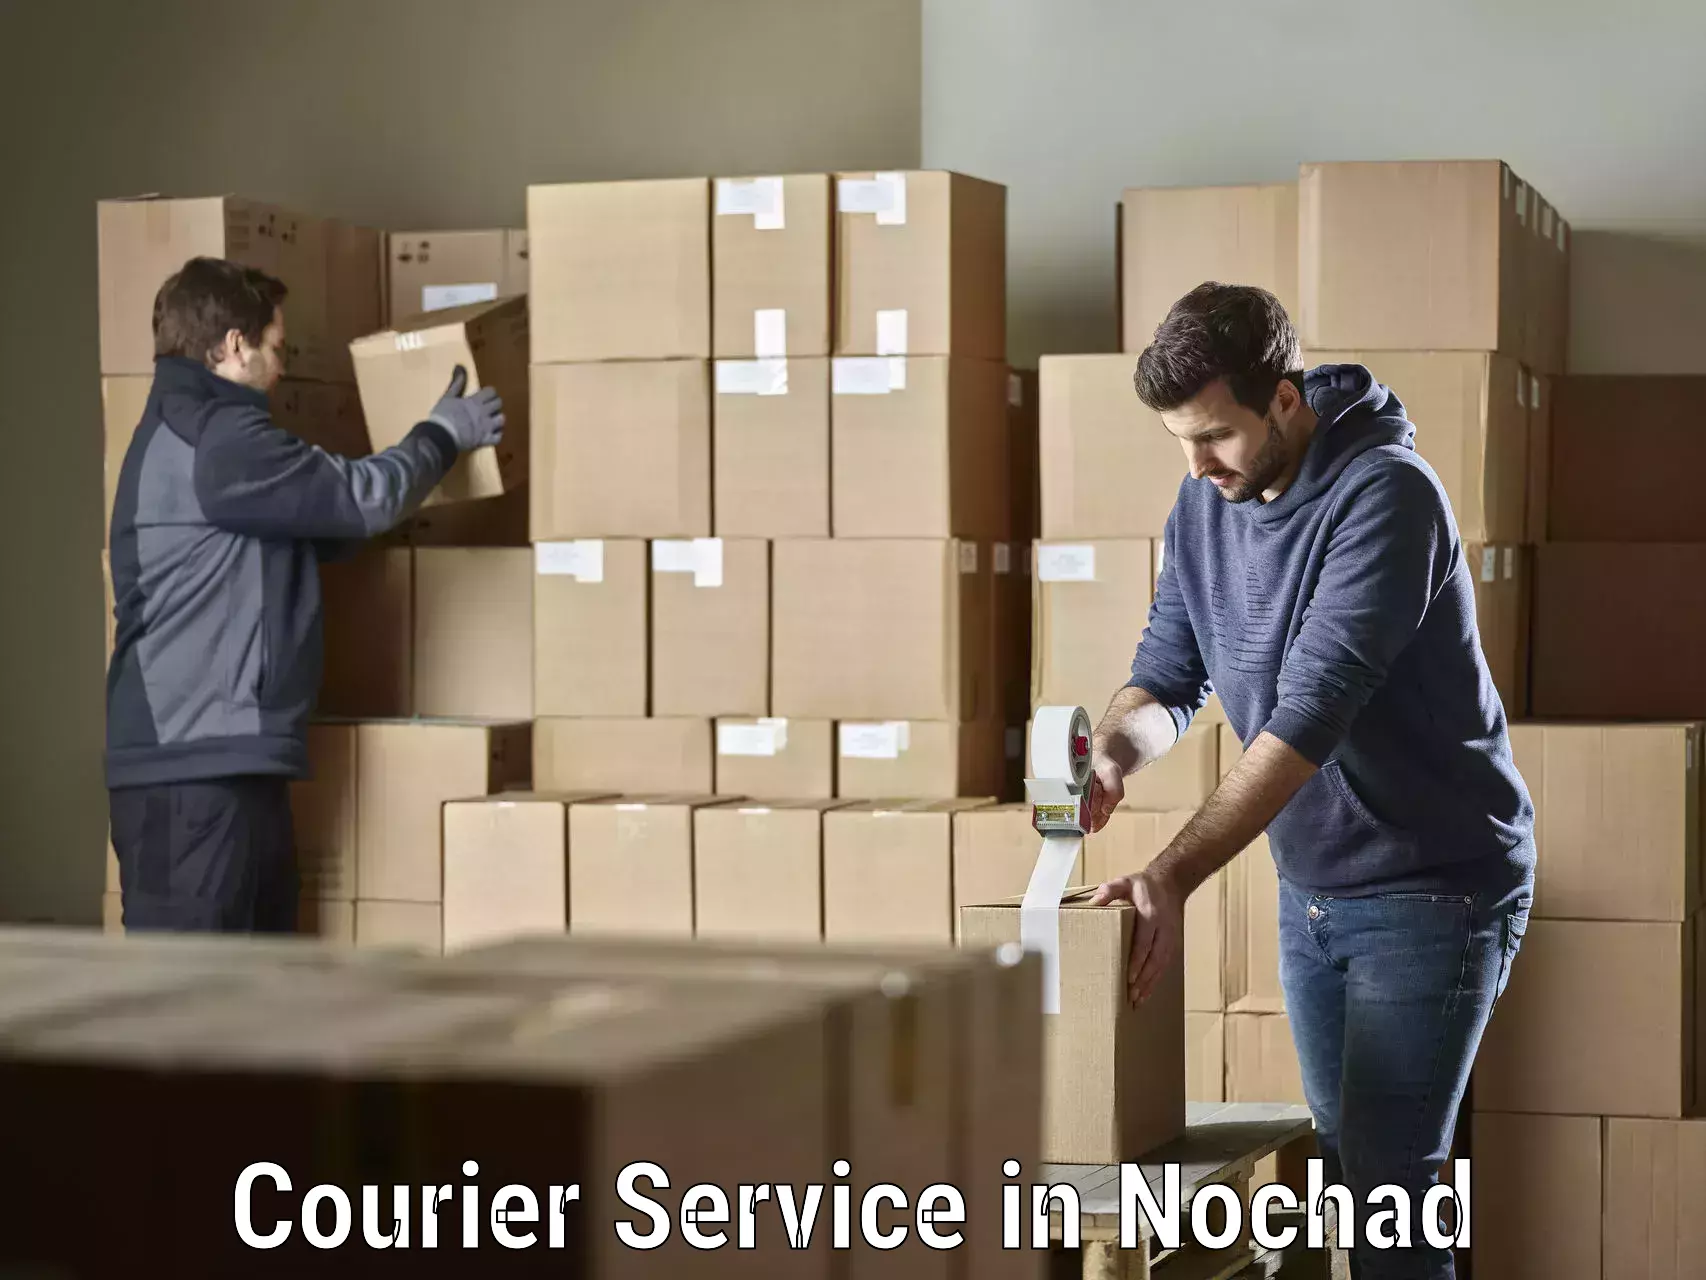 Multi-service courier options in Nochad